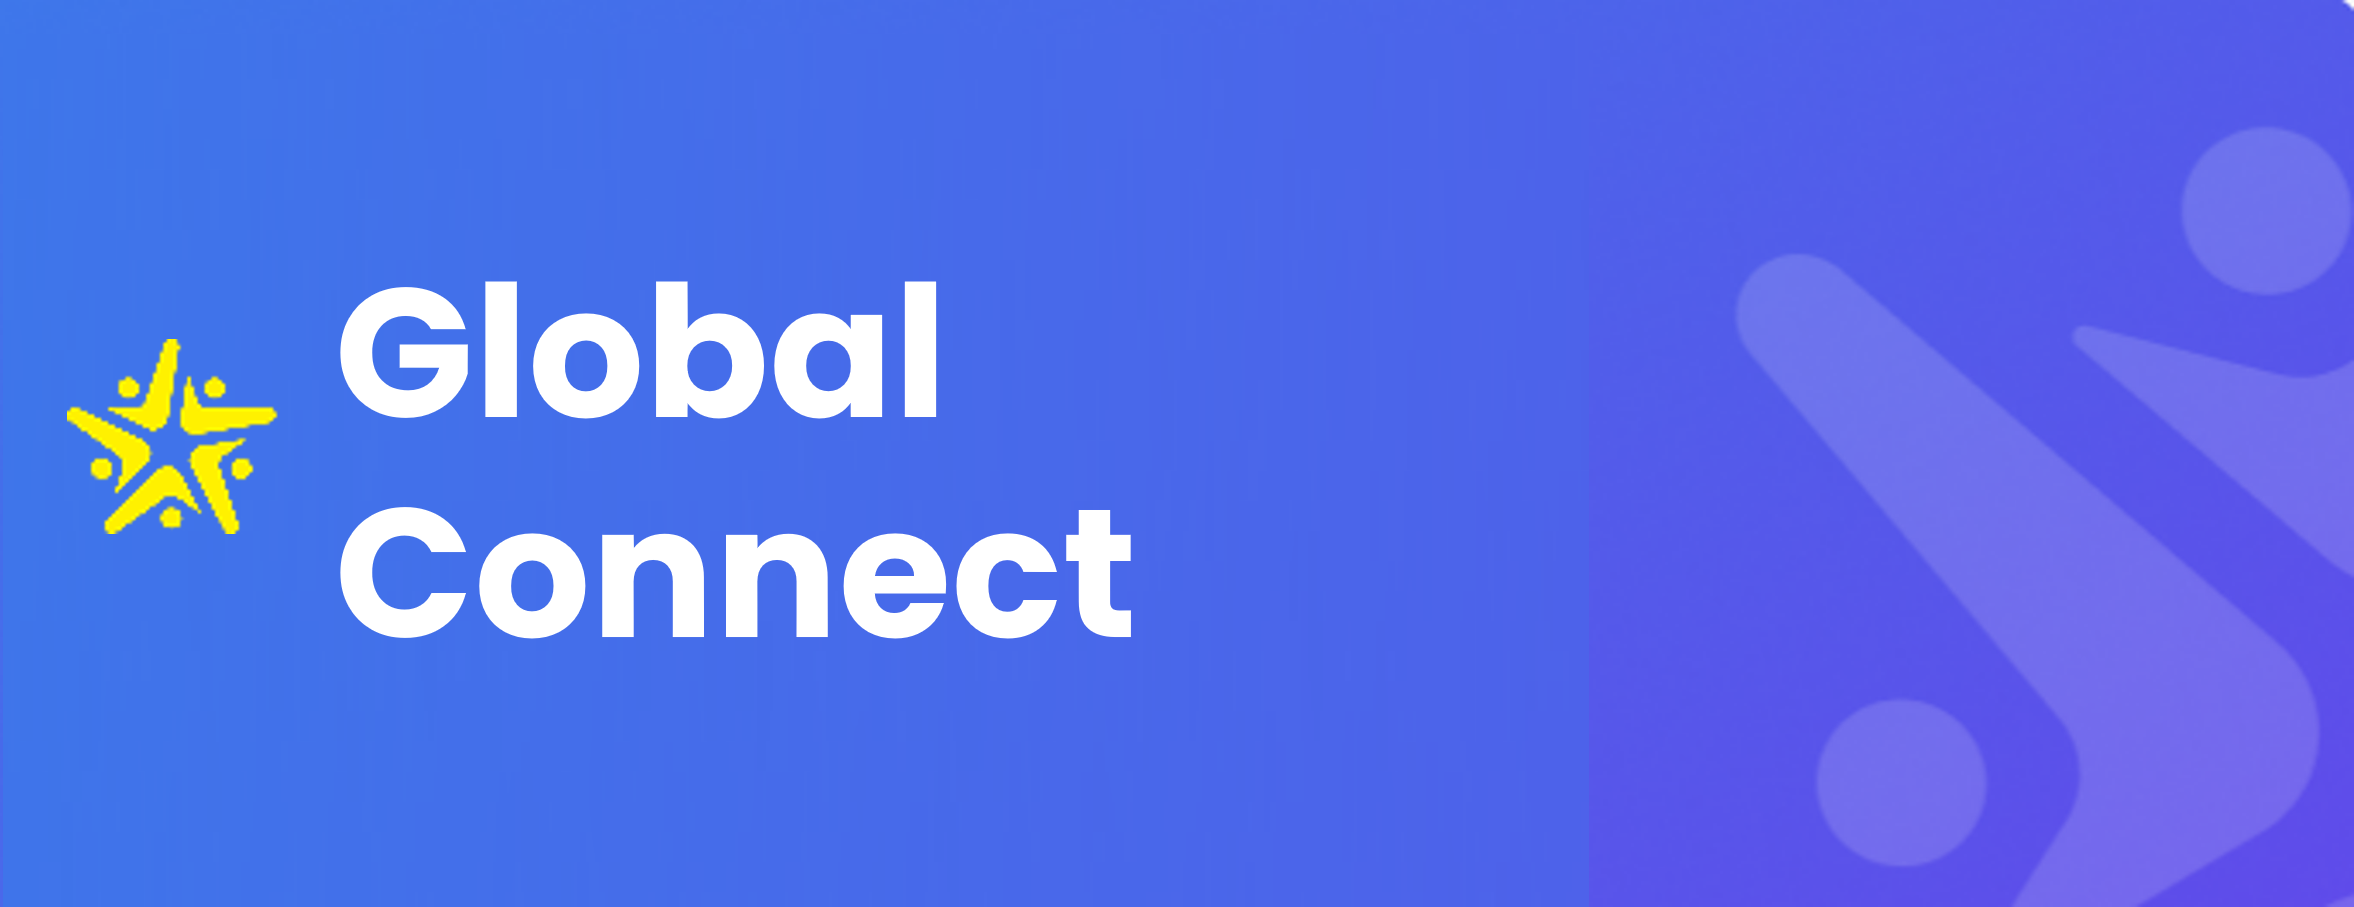 Global connect